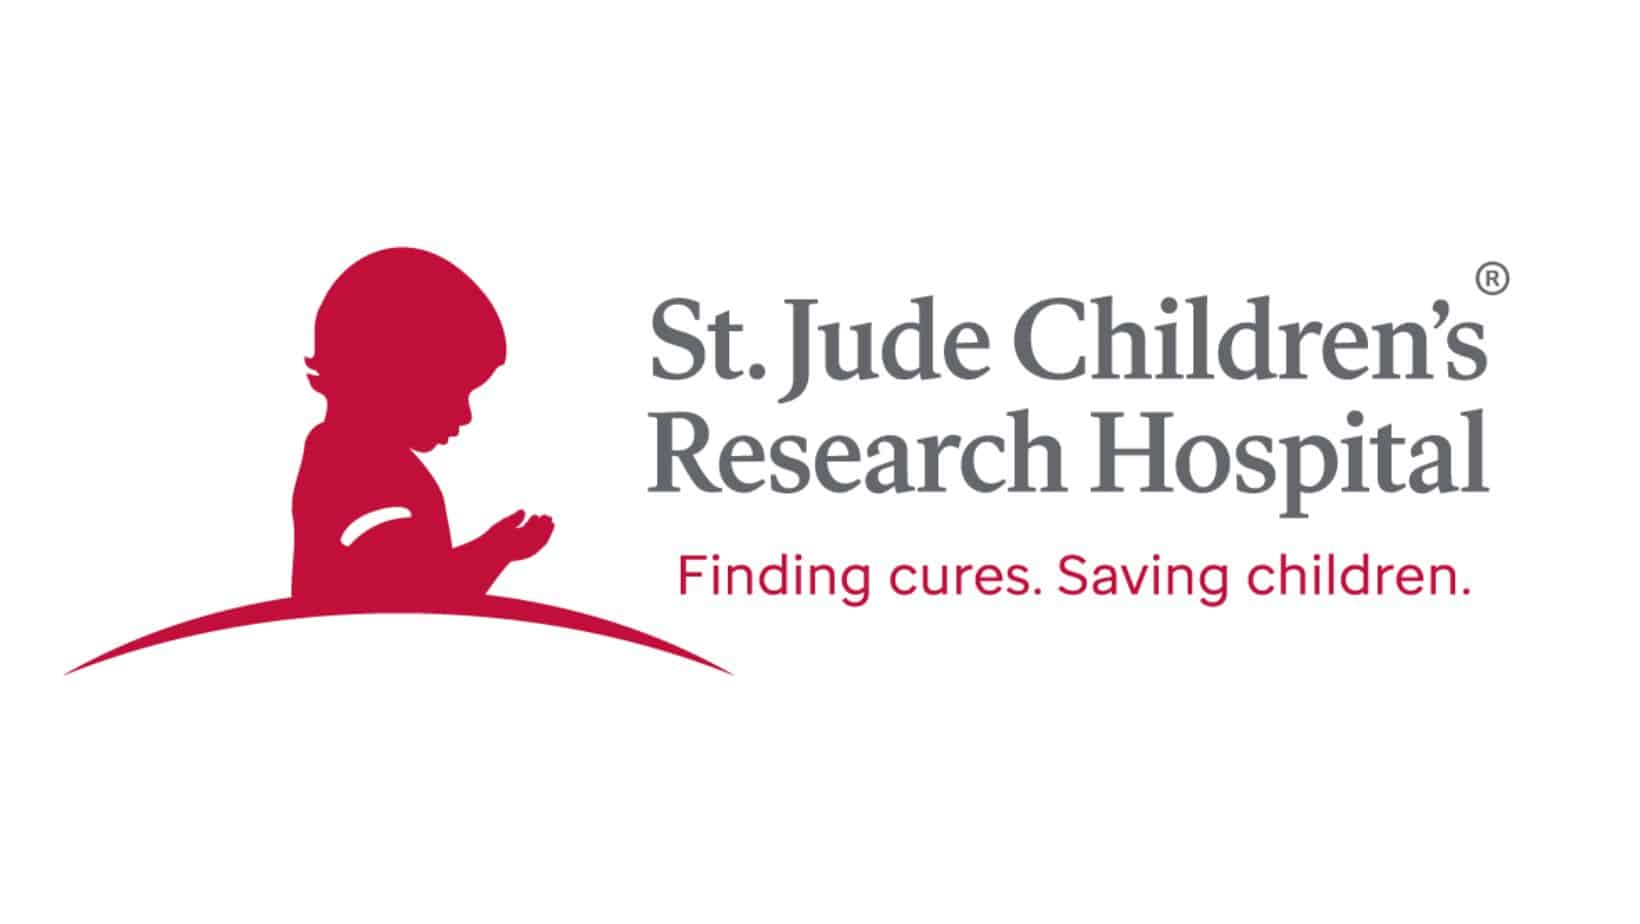 Dental365 makes a positive impact with a generous donation to St. Jude Children’s Research Hospital